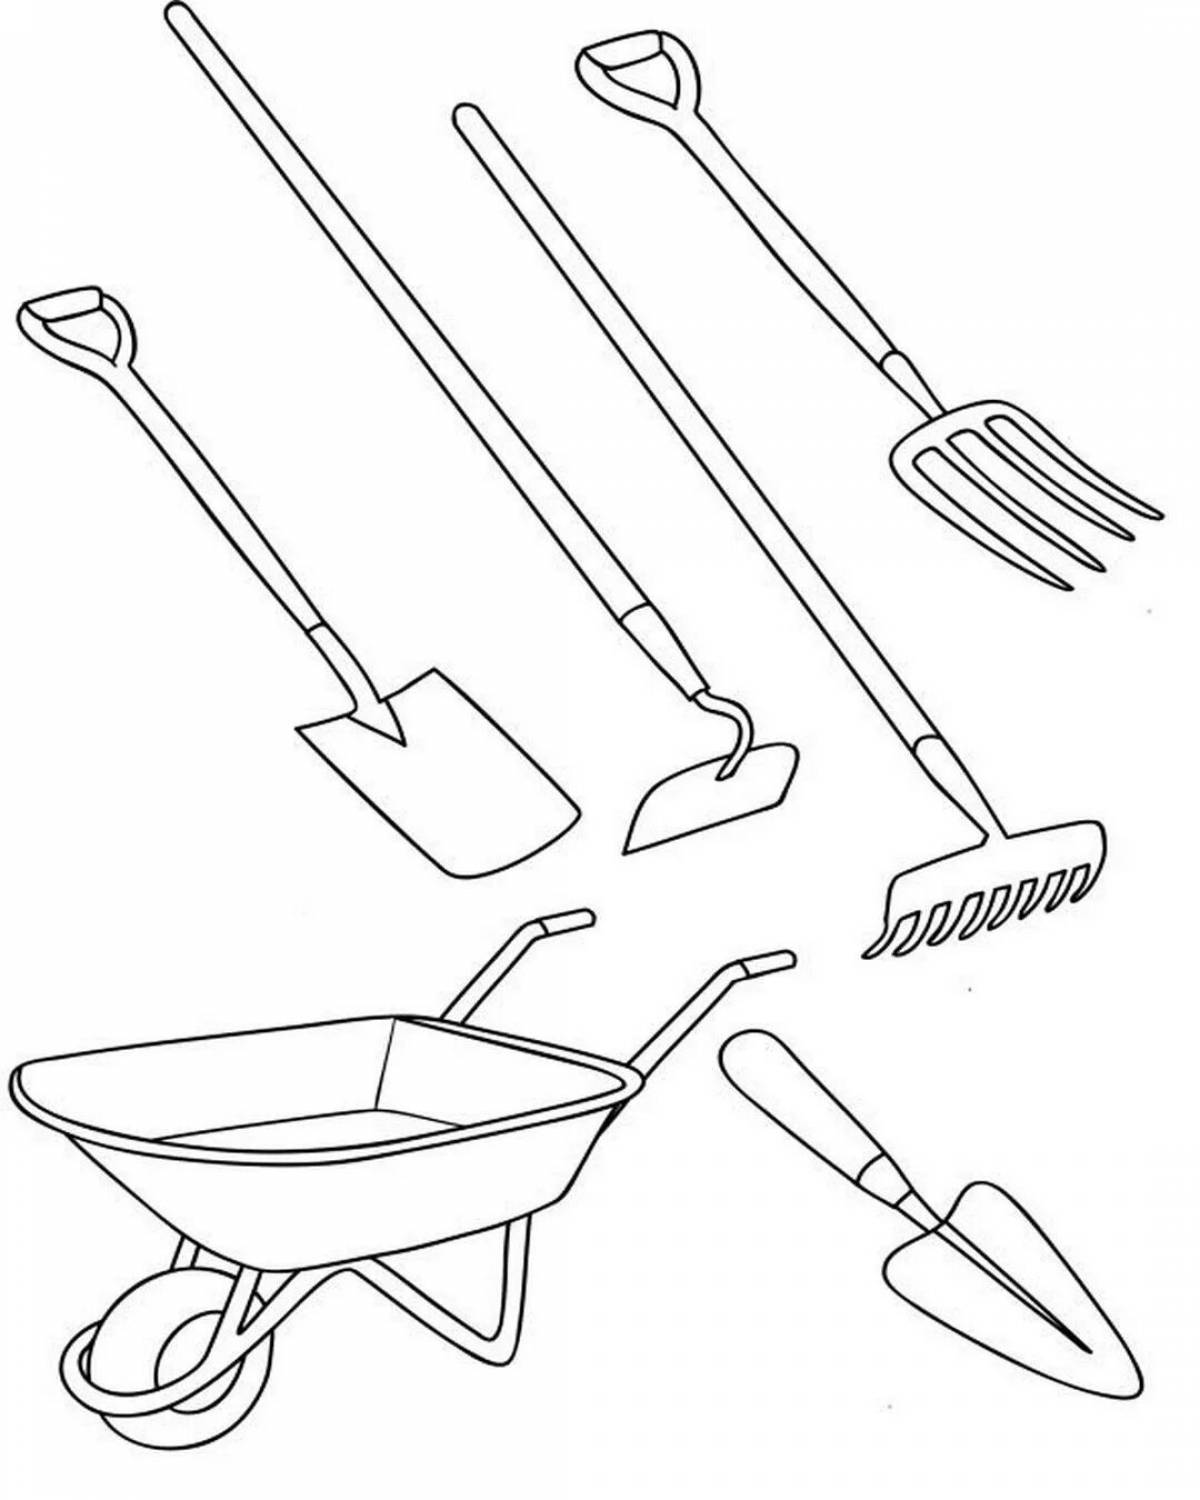 Fun tool coloring page for preschoolers